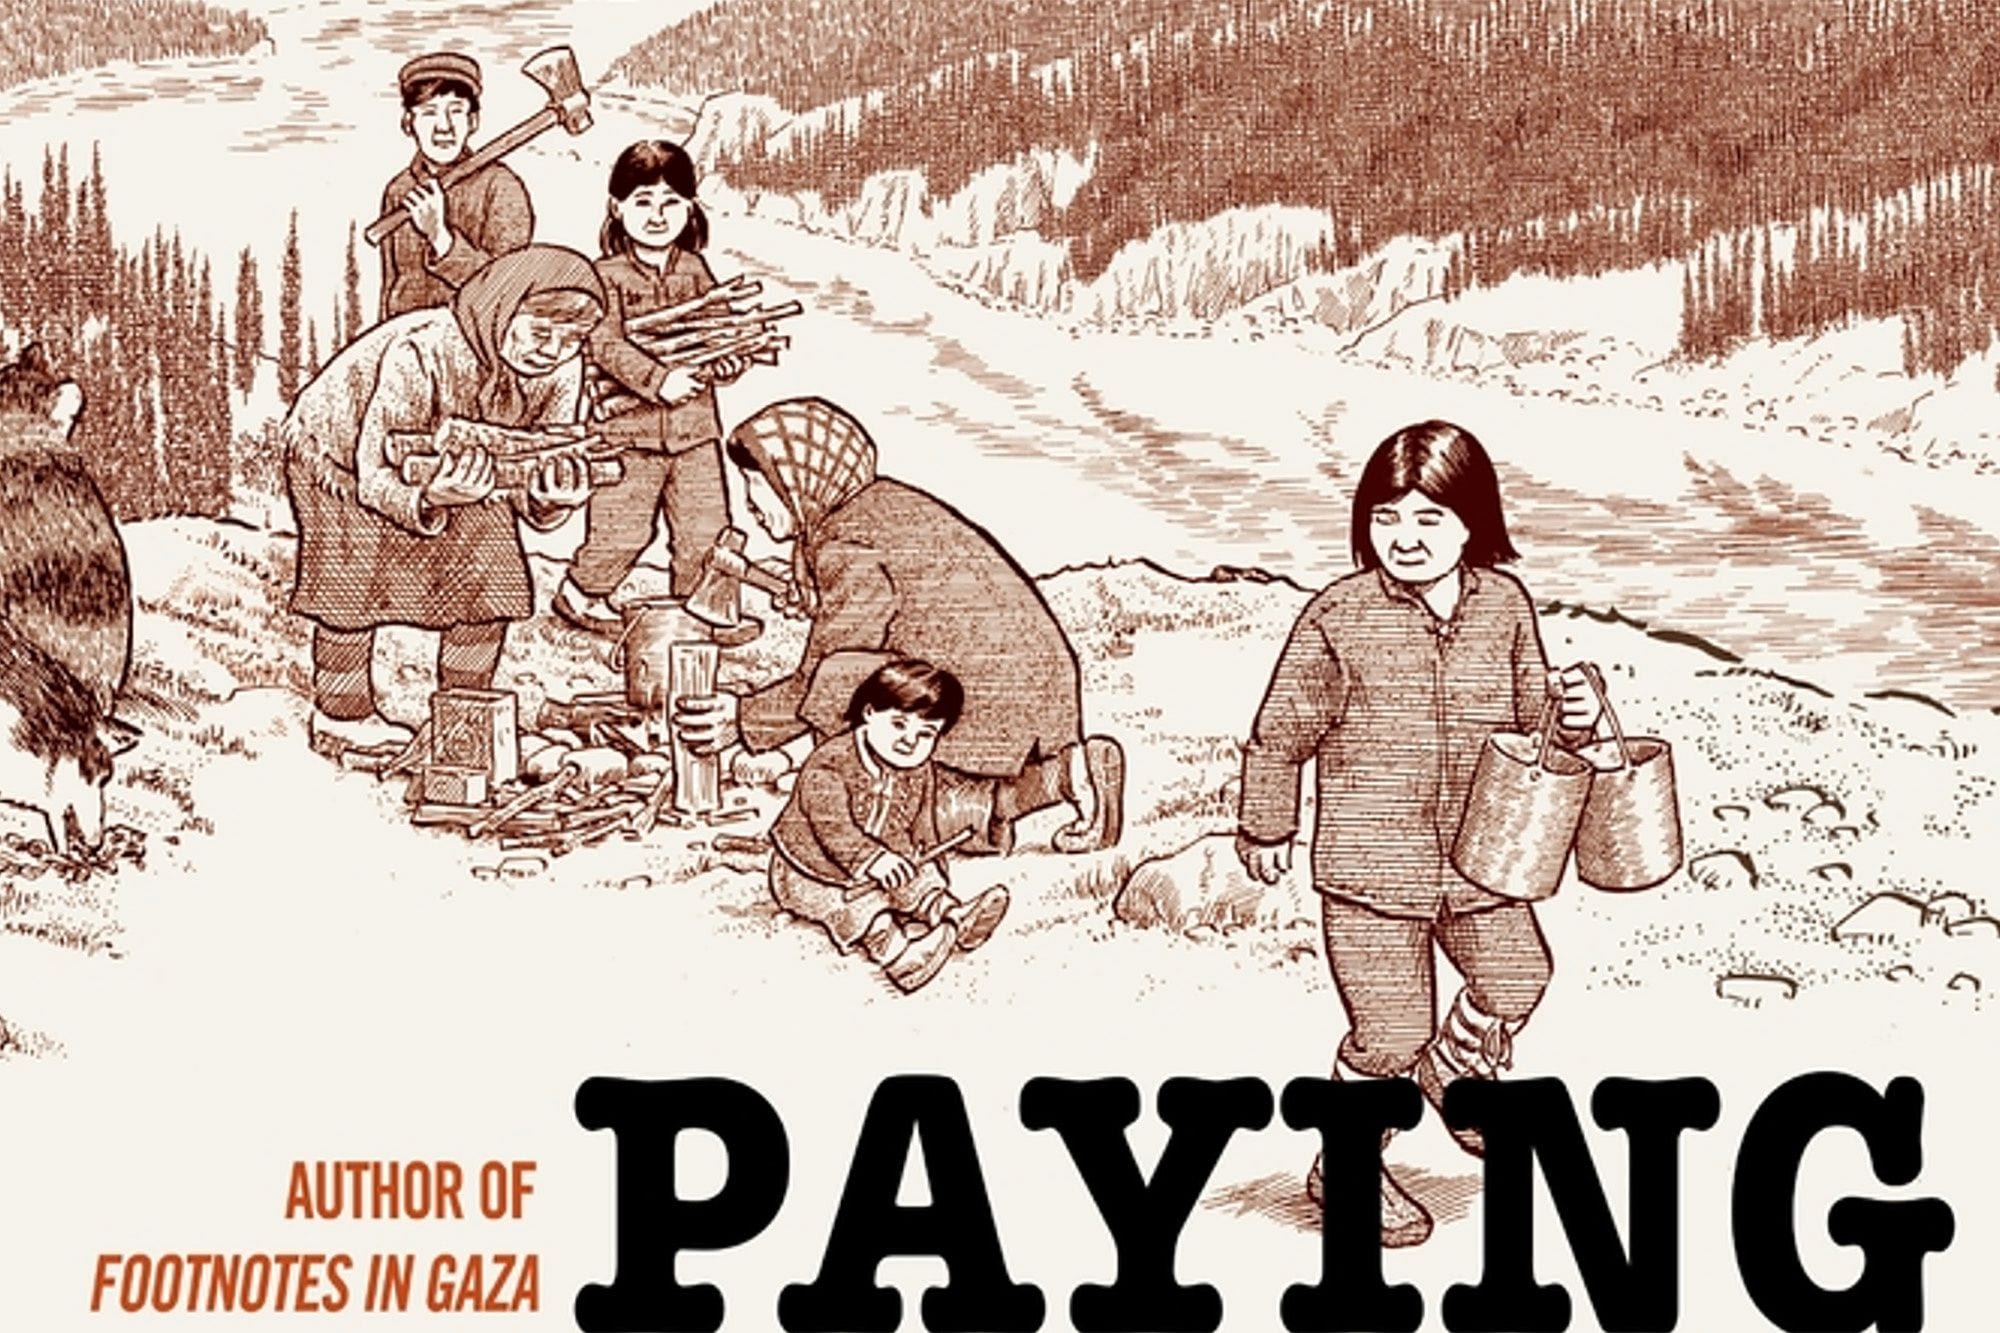 Joe Sacco’s ‘Paying the Land’ Reflects Journalistic Nuance in a Way Other Media Does Not